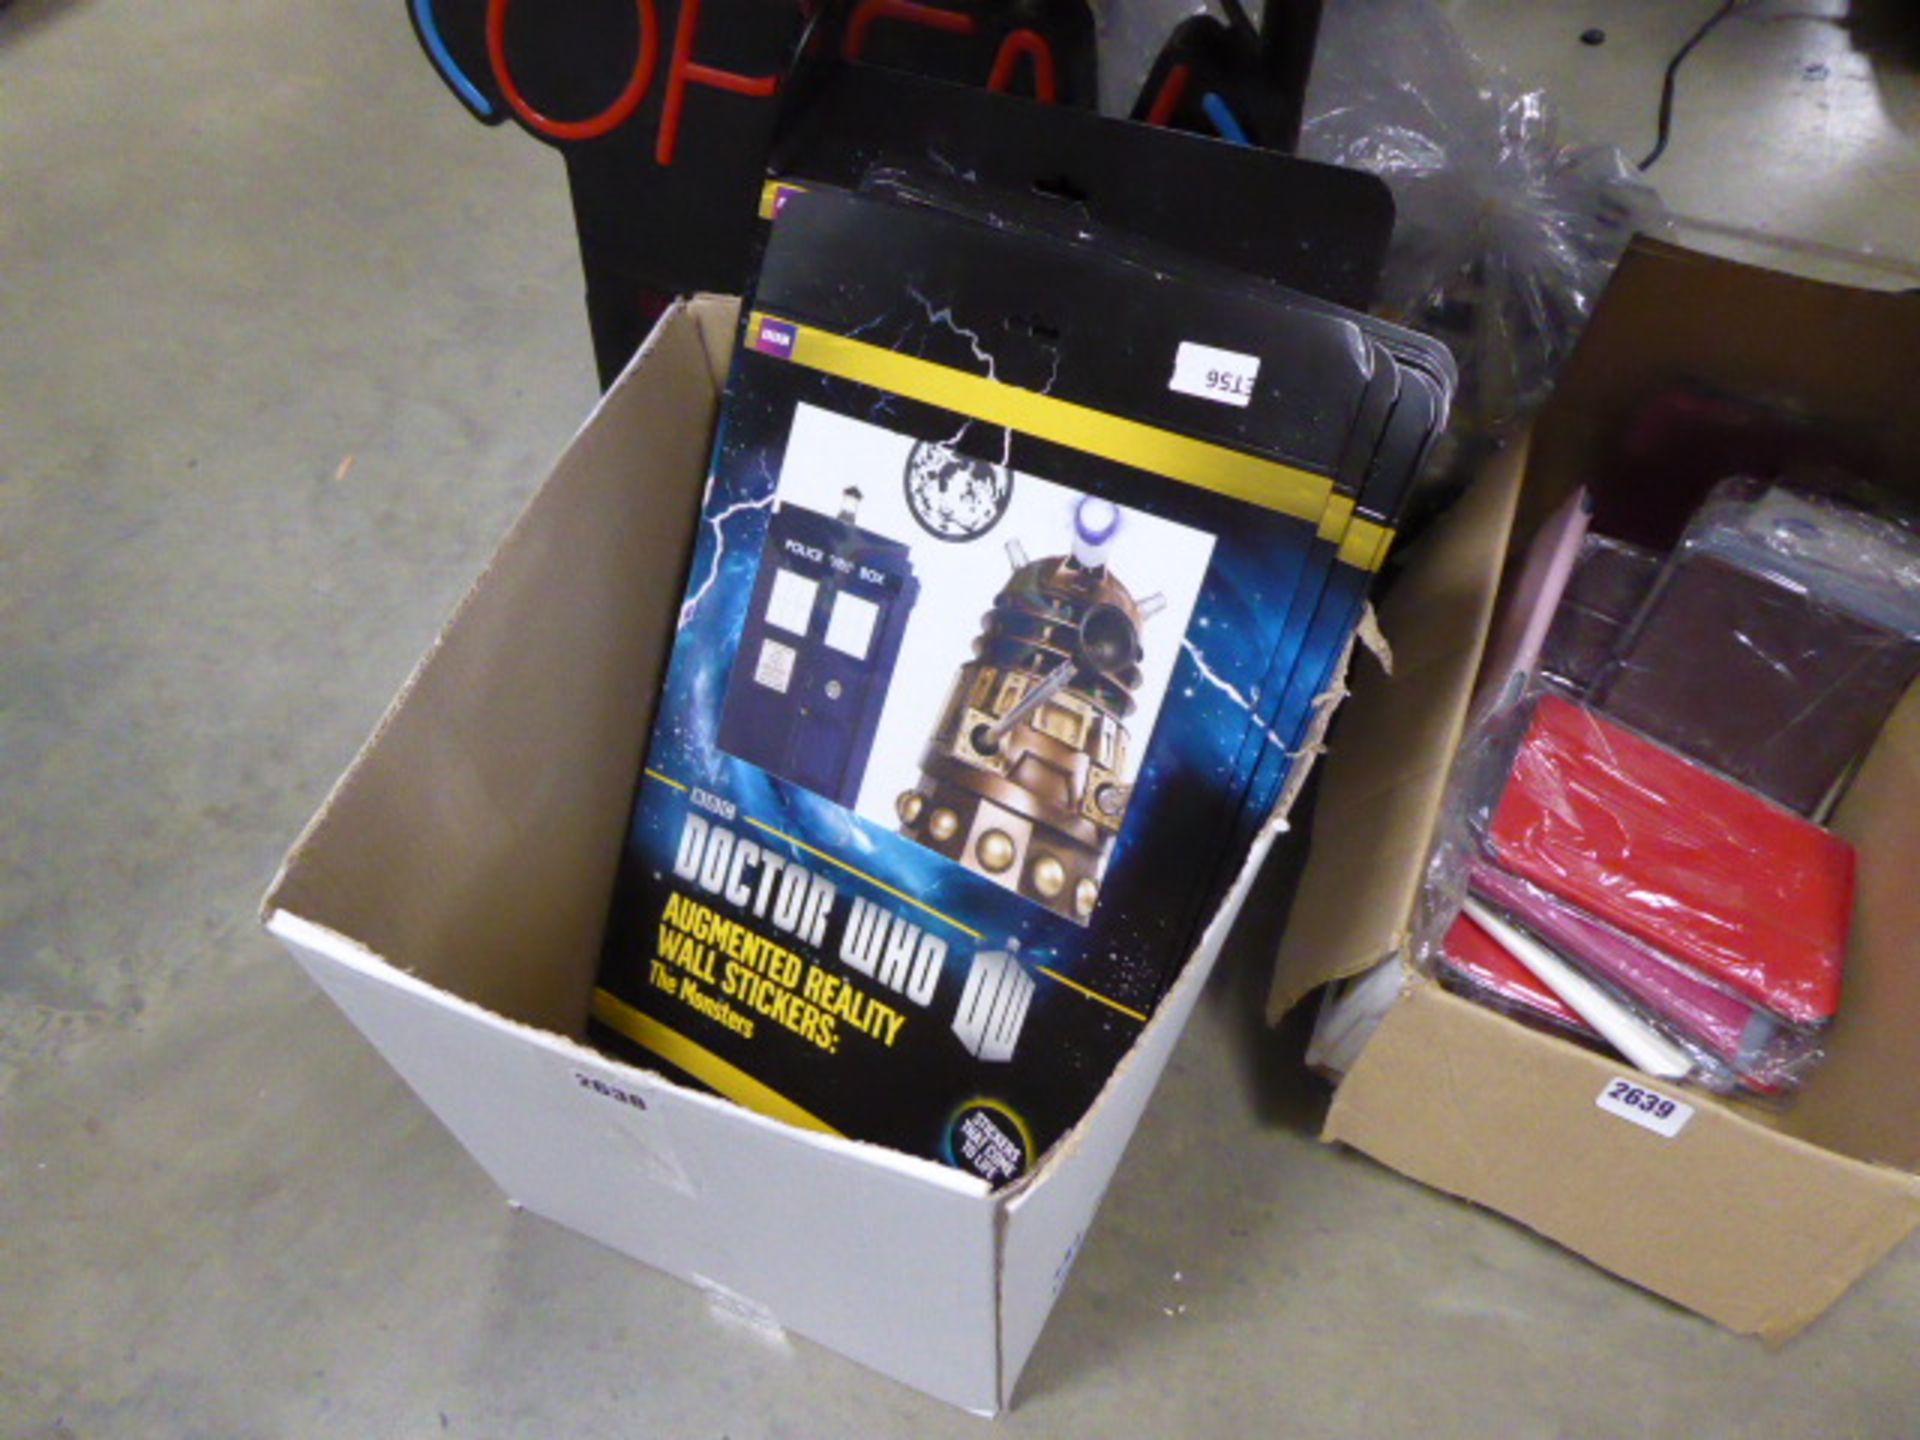 Dr Who augmented reality wall stickers in box